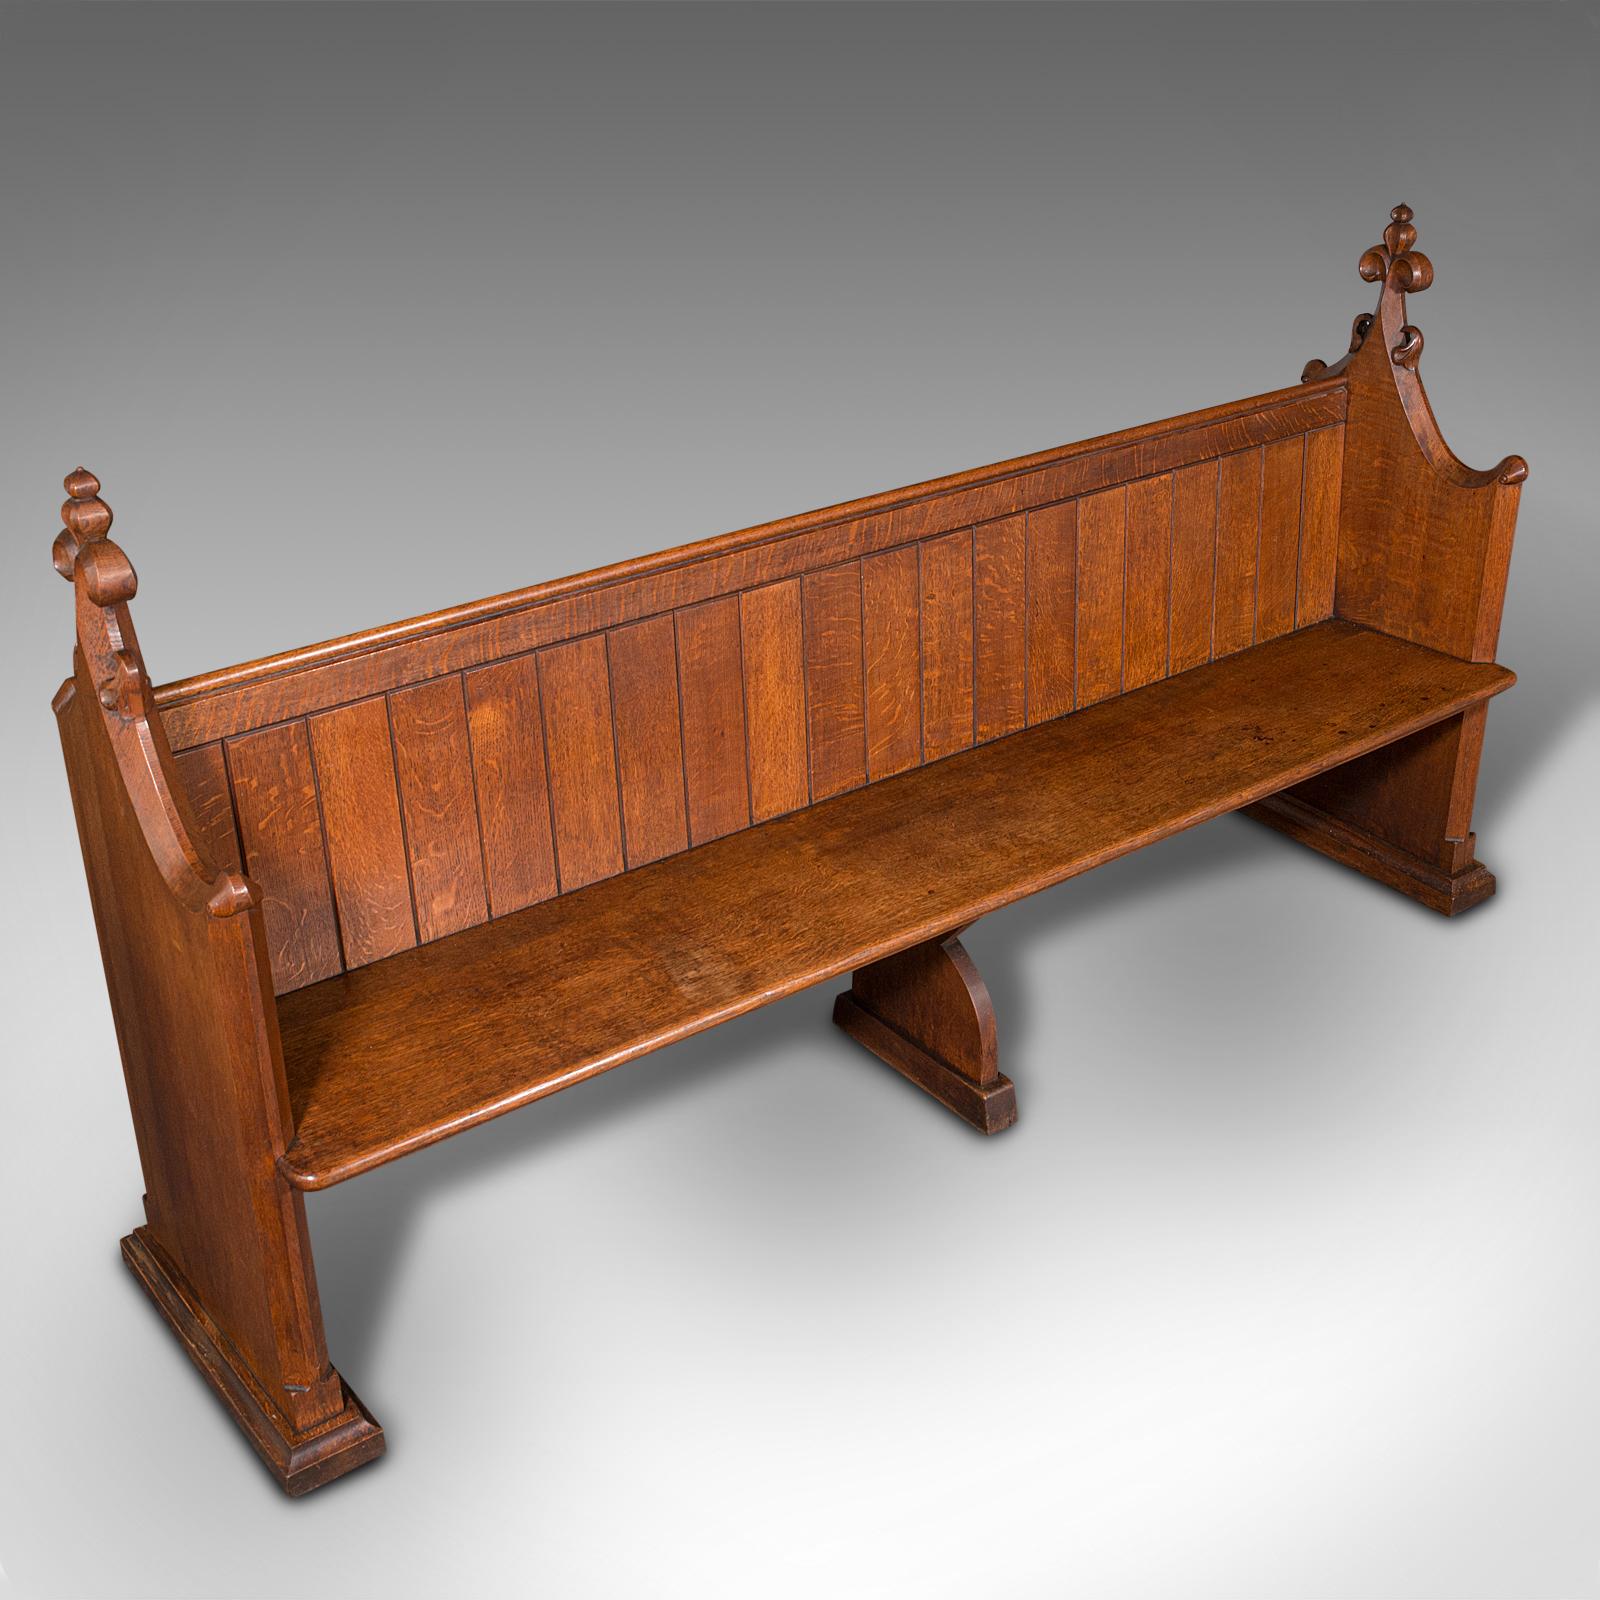 Large Antique Pew, Scottish, Oak, Ecclesiastic, Bench Seat, After Pugin, C.1850 In Good Condition For Sale In Hele, Devon, GB